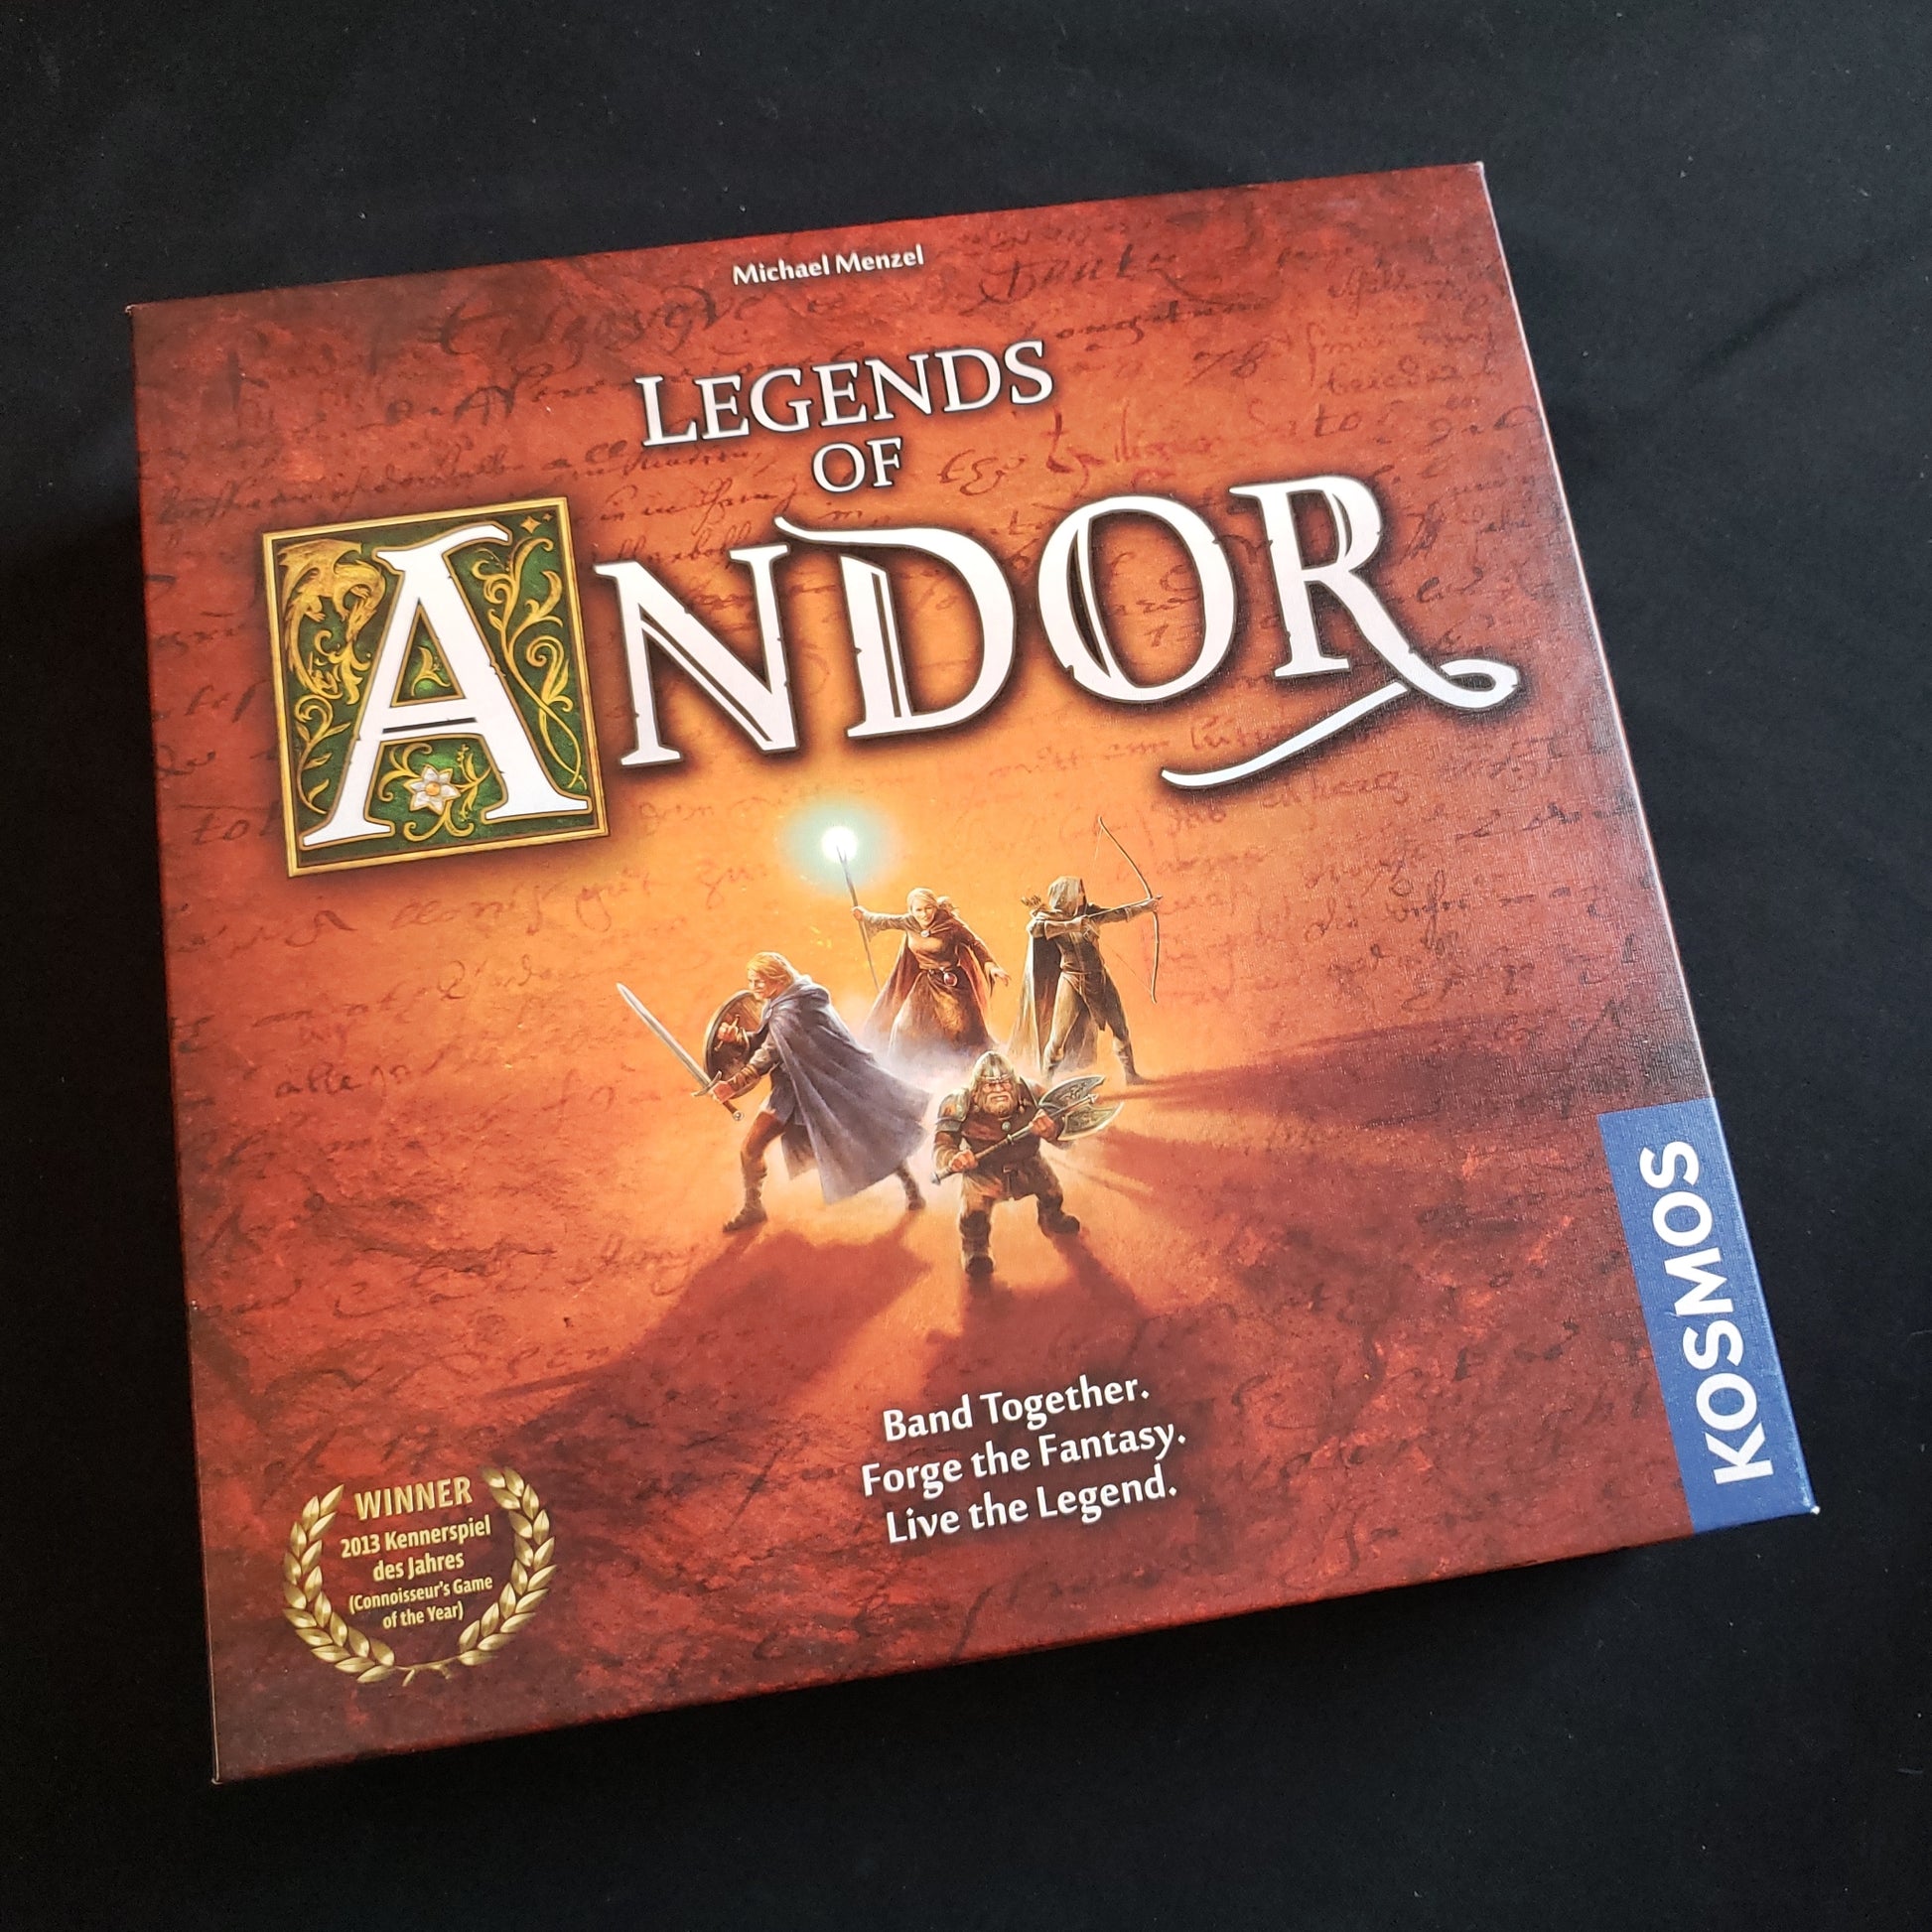 Image shows the front cover of the box of the Legends of Andor board game